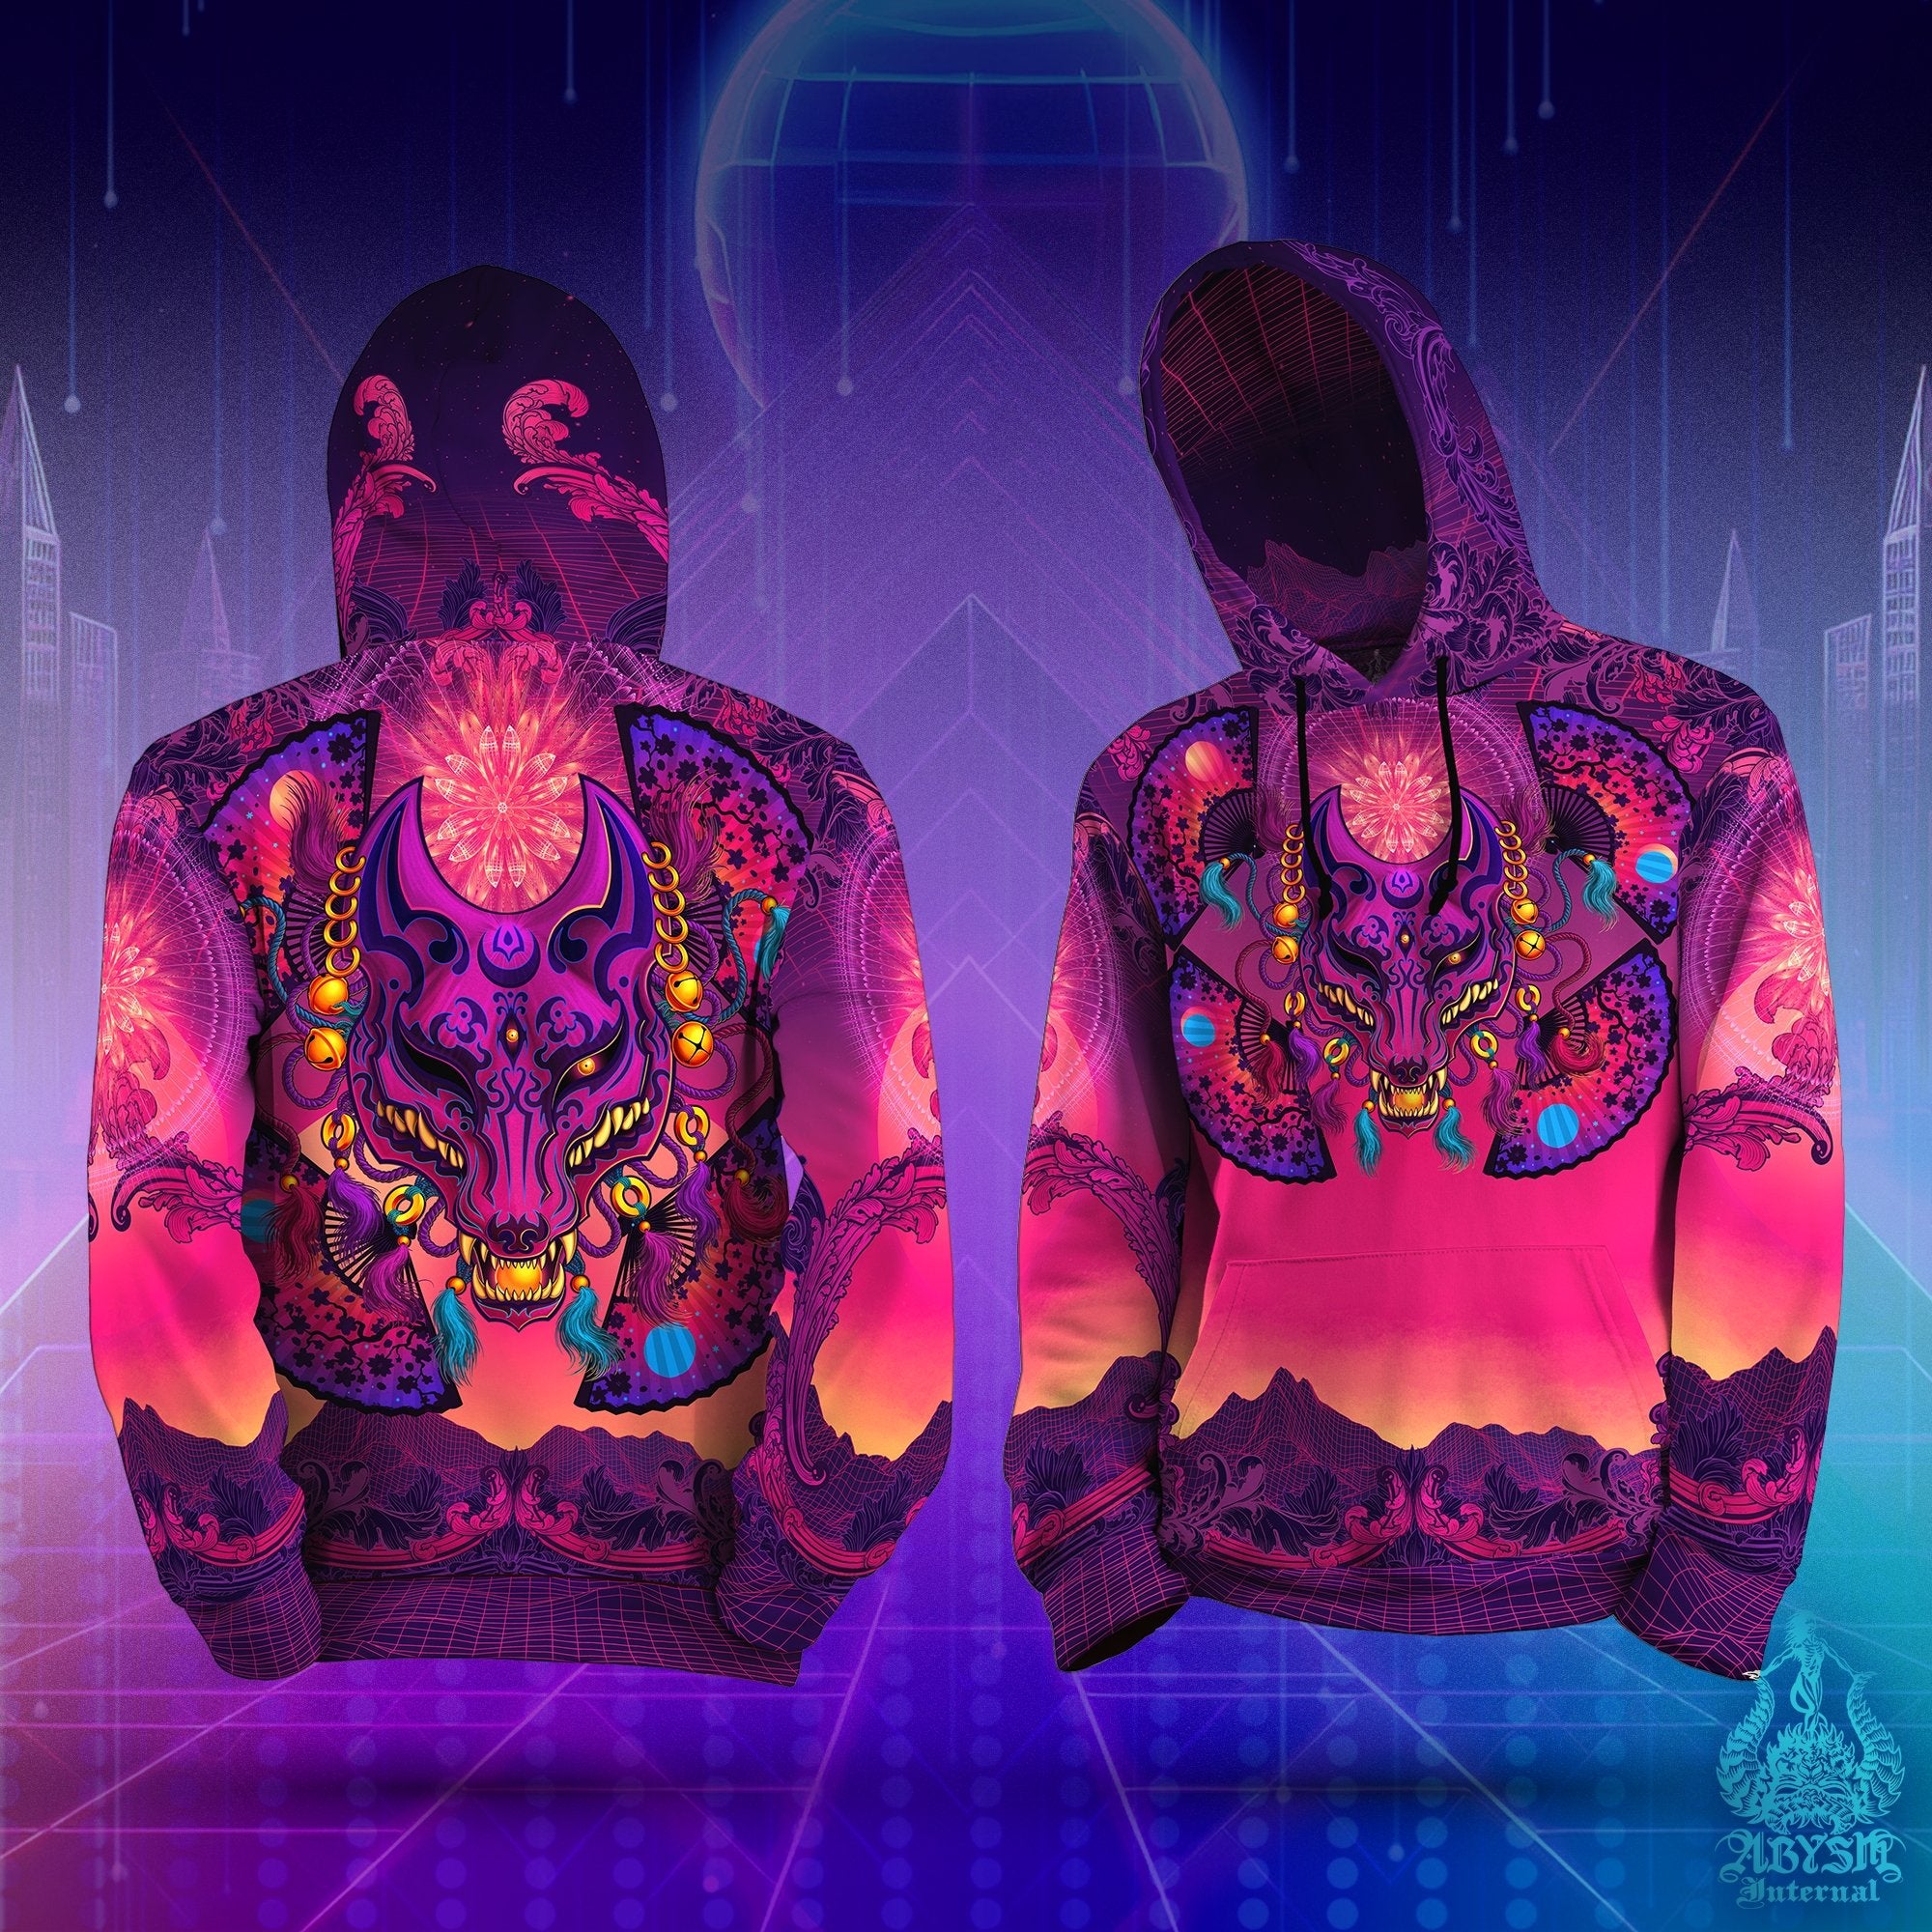 Japanese Vaporwave Hoodie, Trippy Outfit, Synthwave Streetwear, Psychedelic Festival, Alternative Clothing, Unisex Gift for Gamers, Anime & Manga fans - Retrowave Kitsune - Abysm Internal